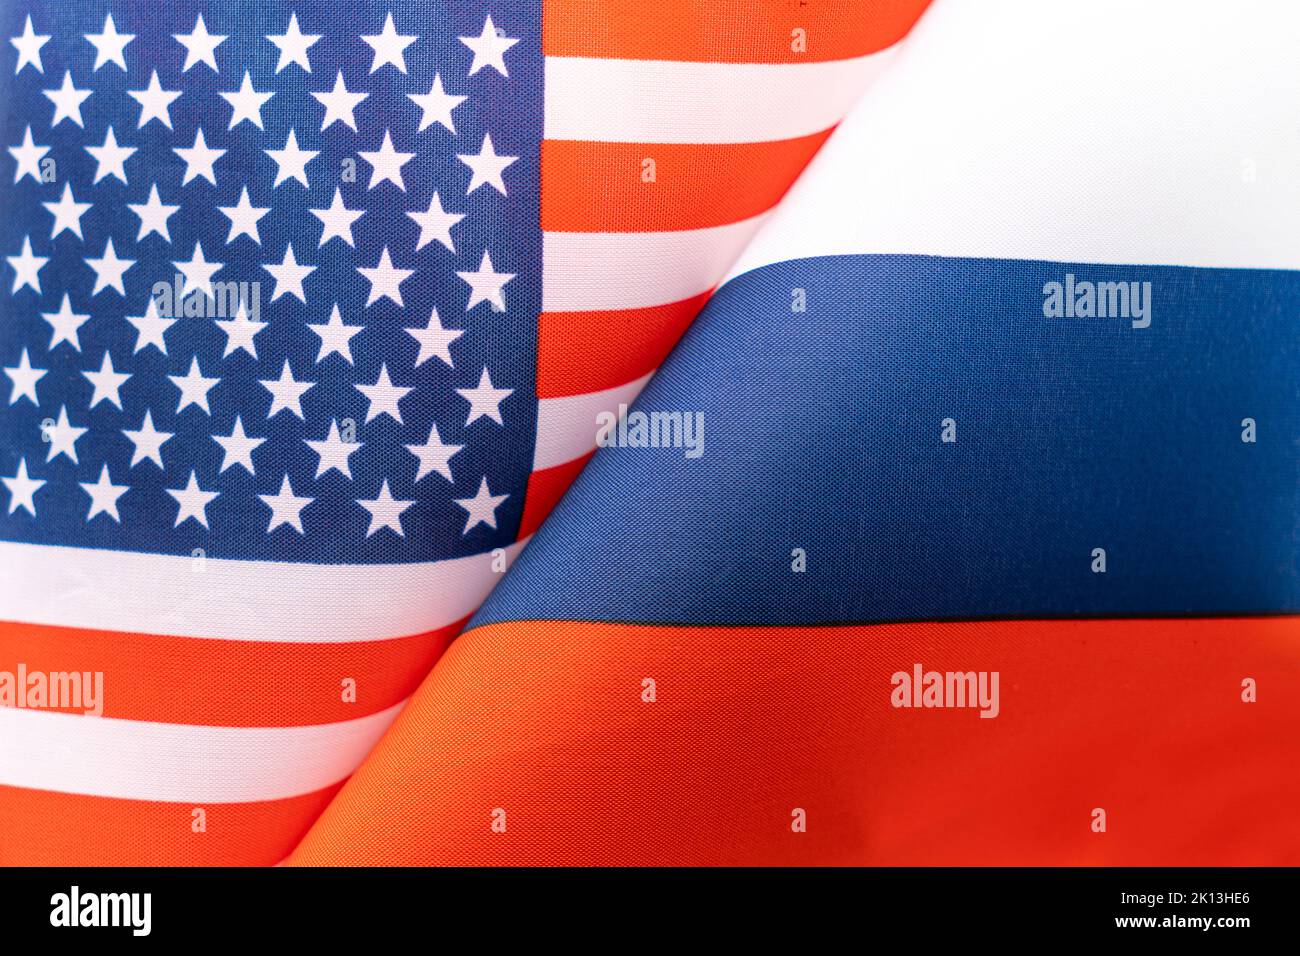 Background of the flags of the USA and russia. The concept of interaction or counteraction between the two countries. International relations. politic Stock Photo